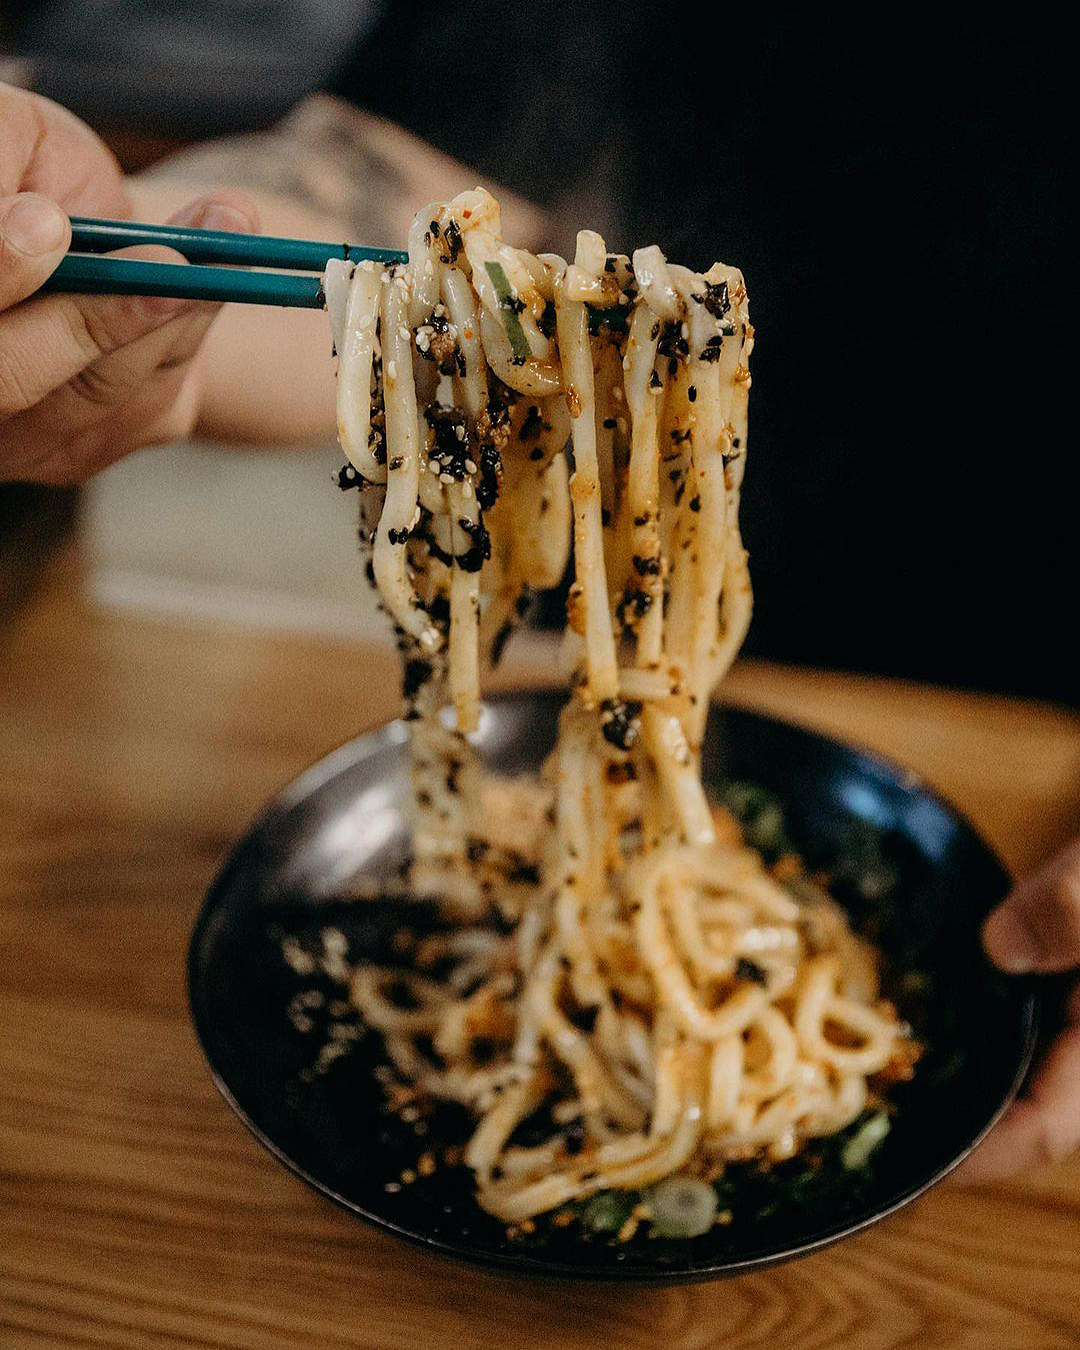 A noodle dish looks incredibly moreish held between chopsticks.